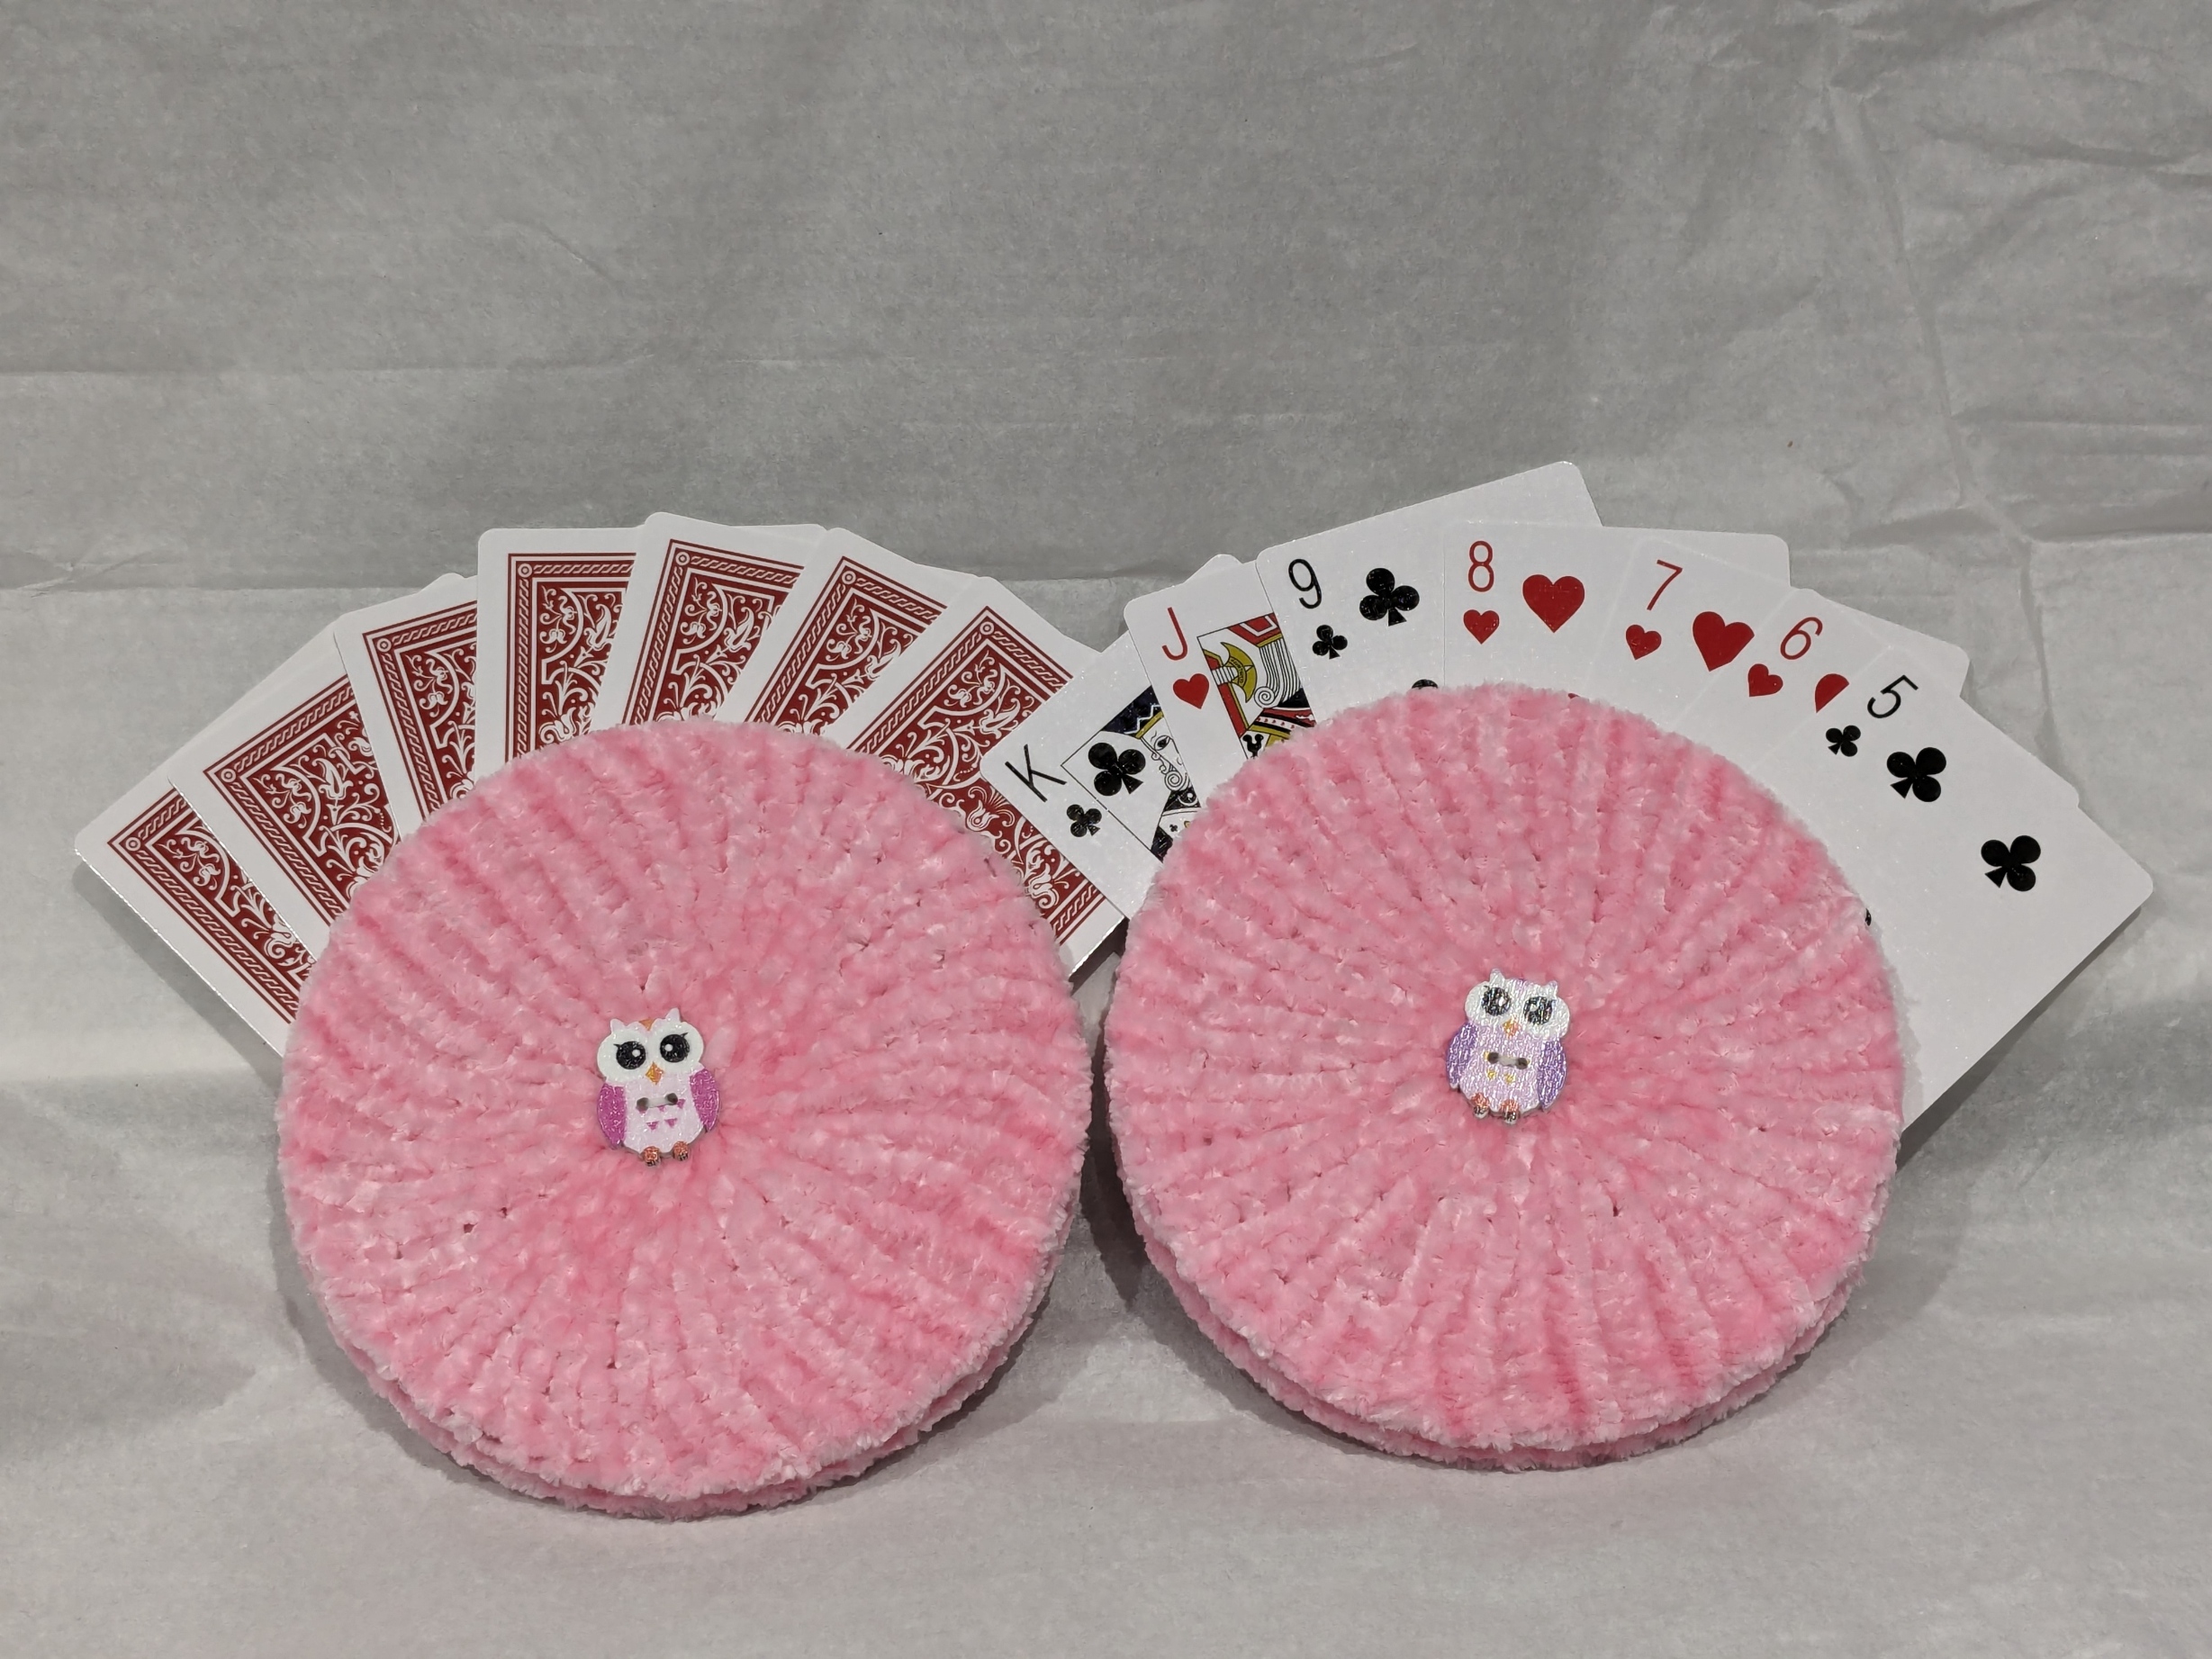 Playing card holders, easy hold cards, care home aid, granny cards, card games